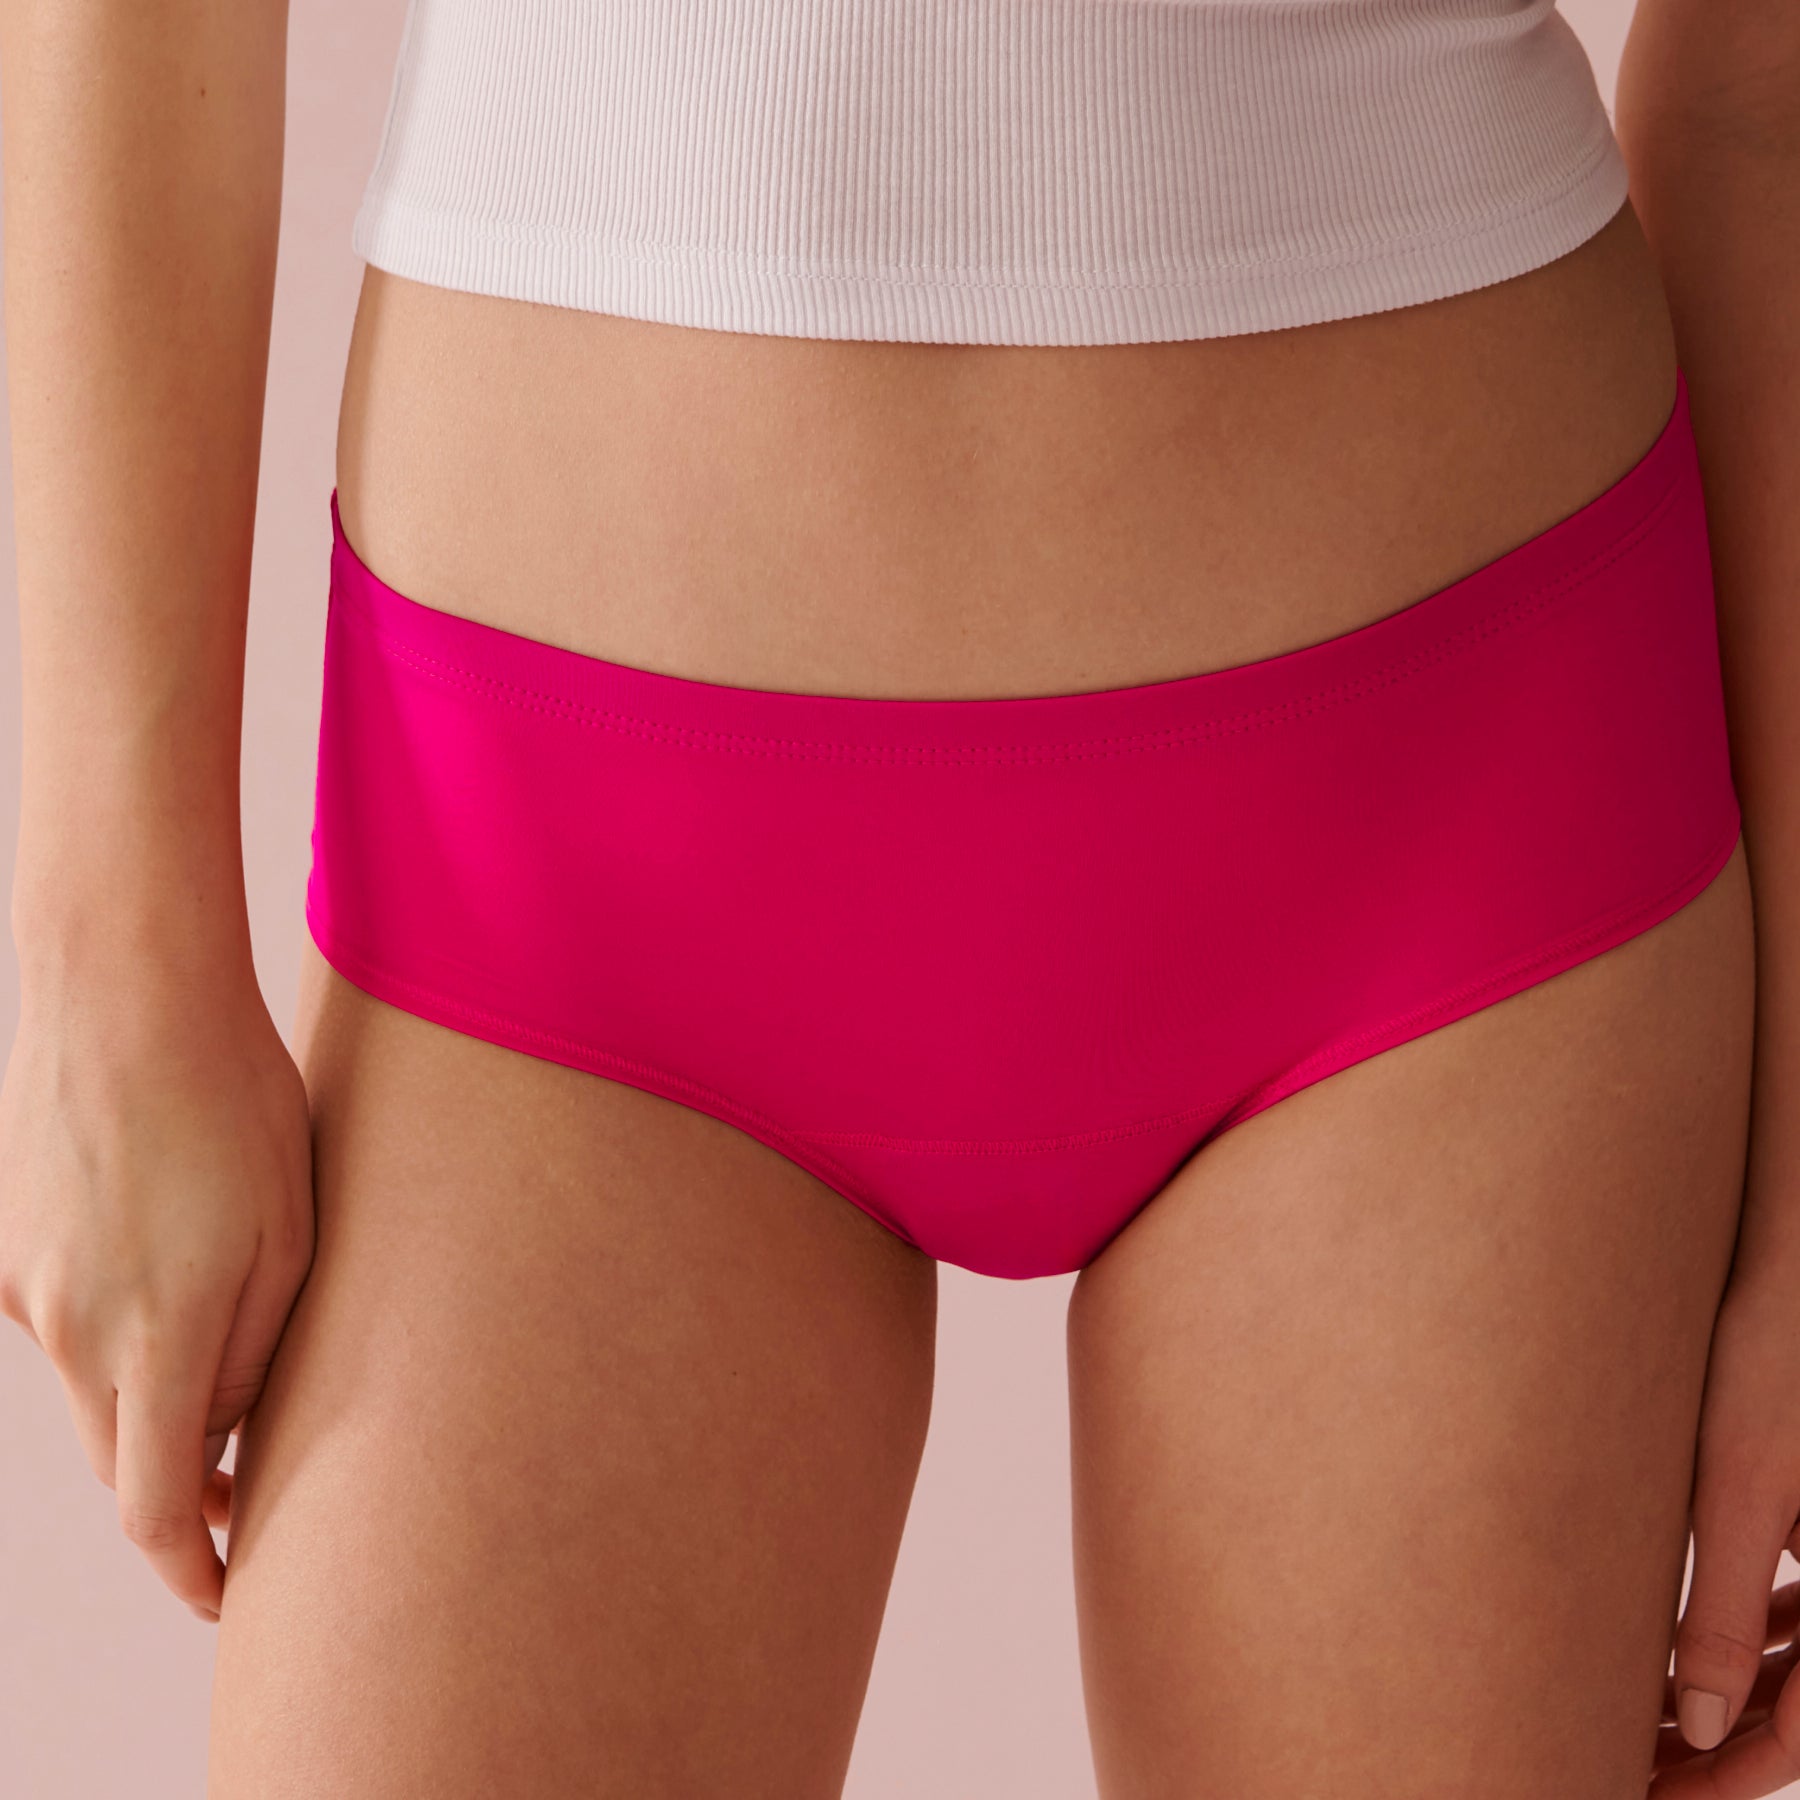 From of the pink hiphugger period panty – NEWEX